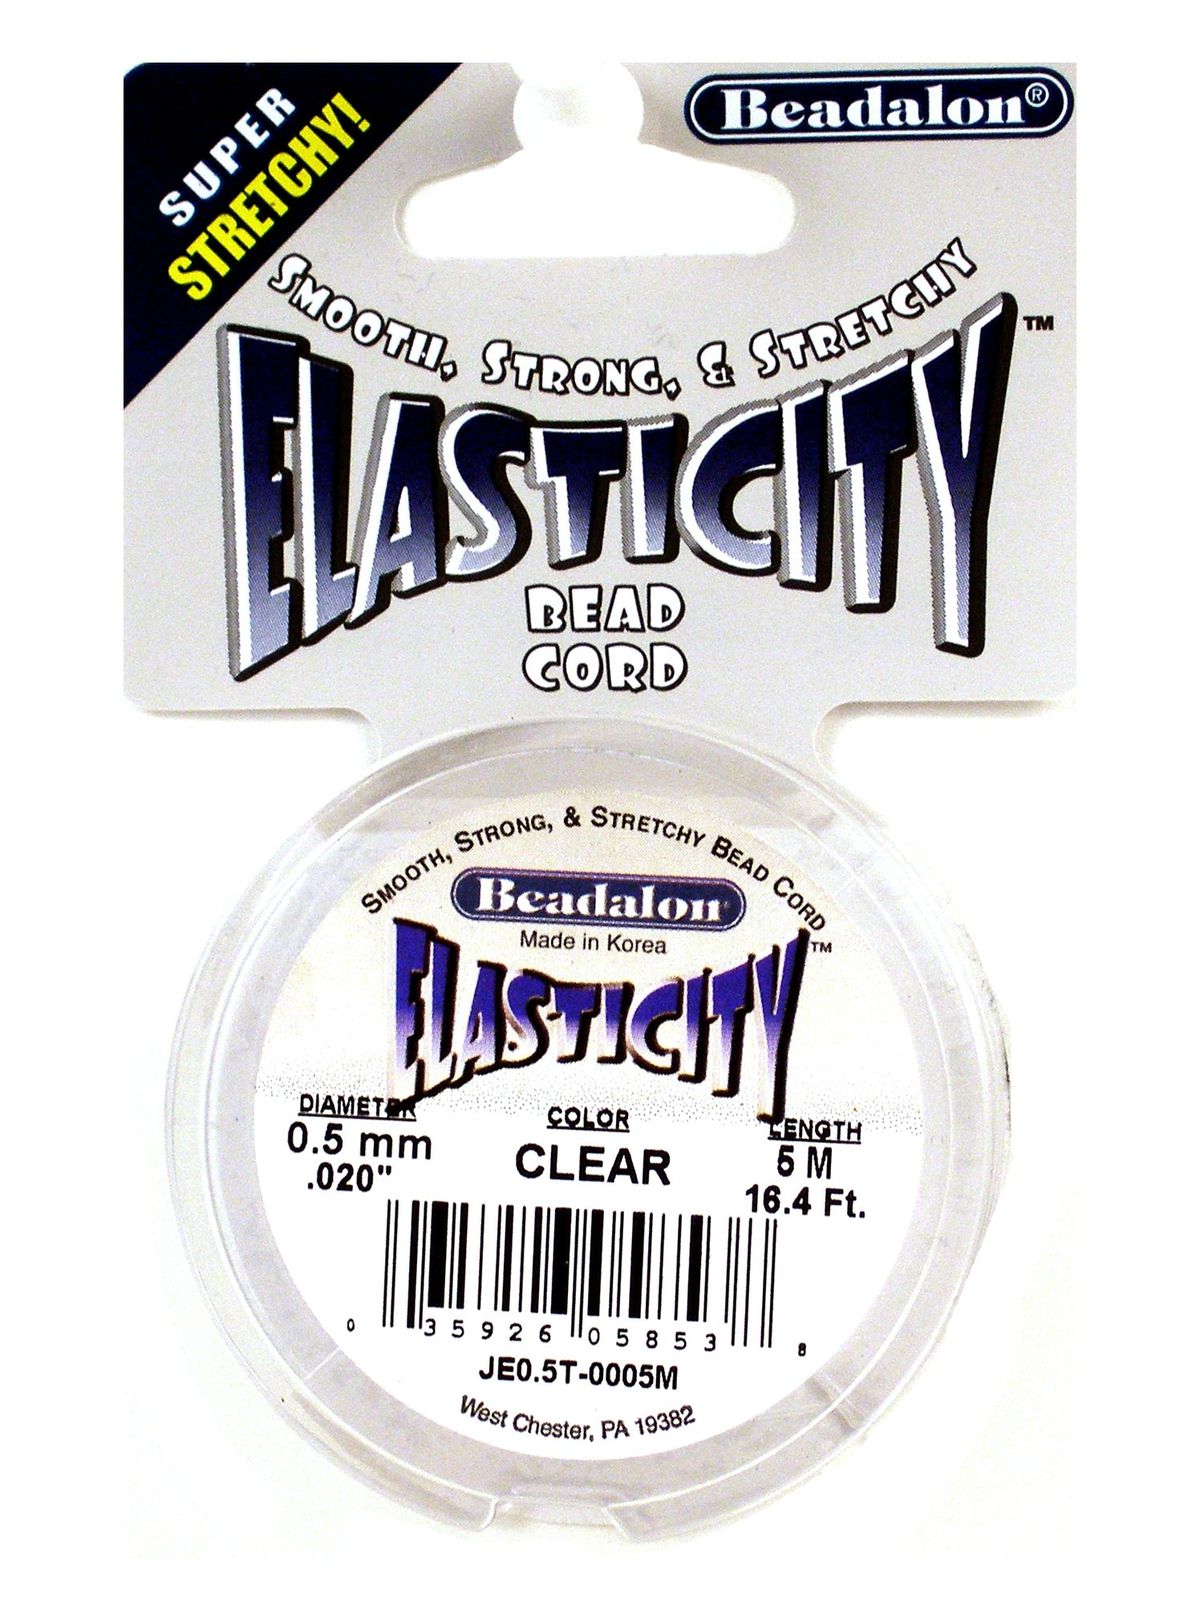 Elasticity Bead Cord 0.5 Mm Clear 16.4 Ft.